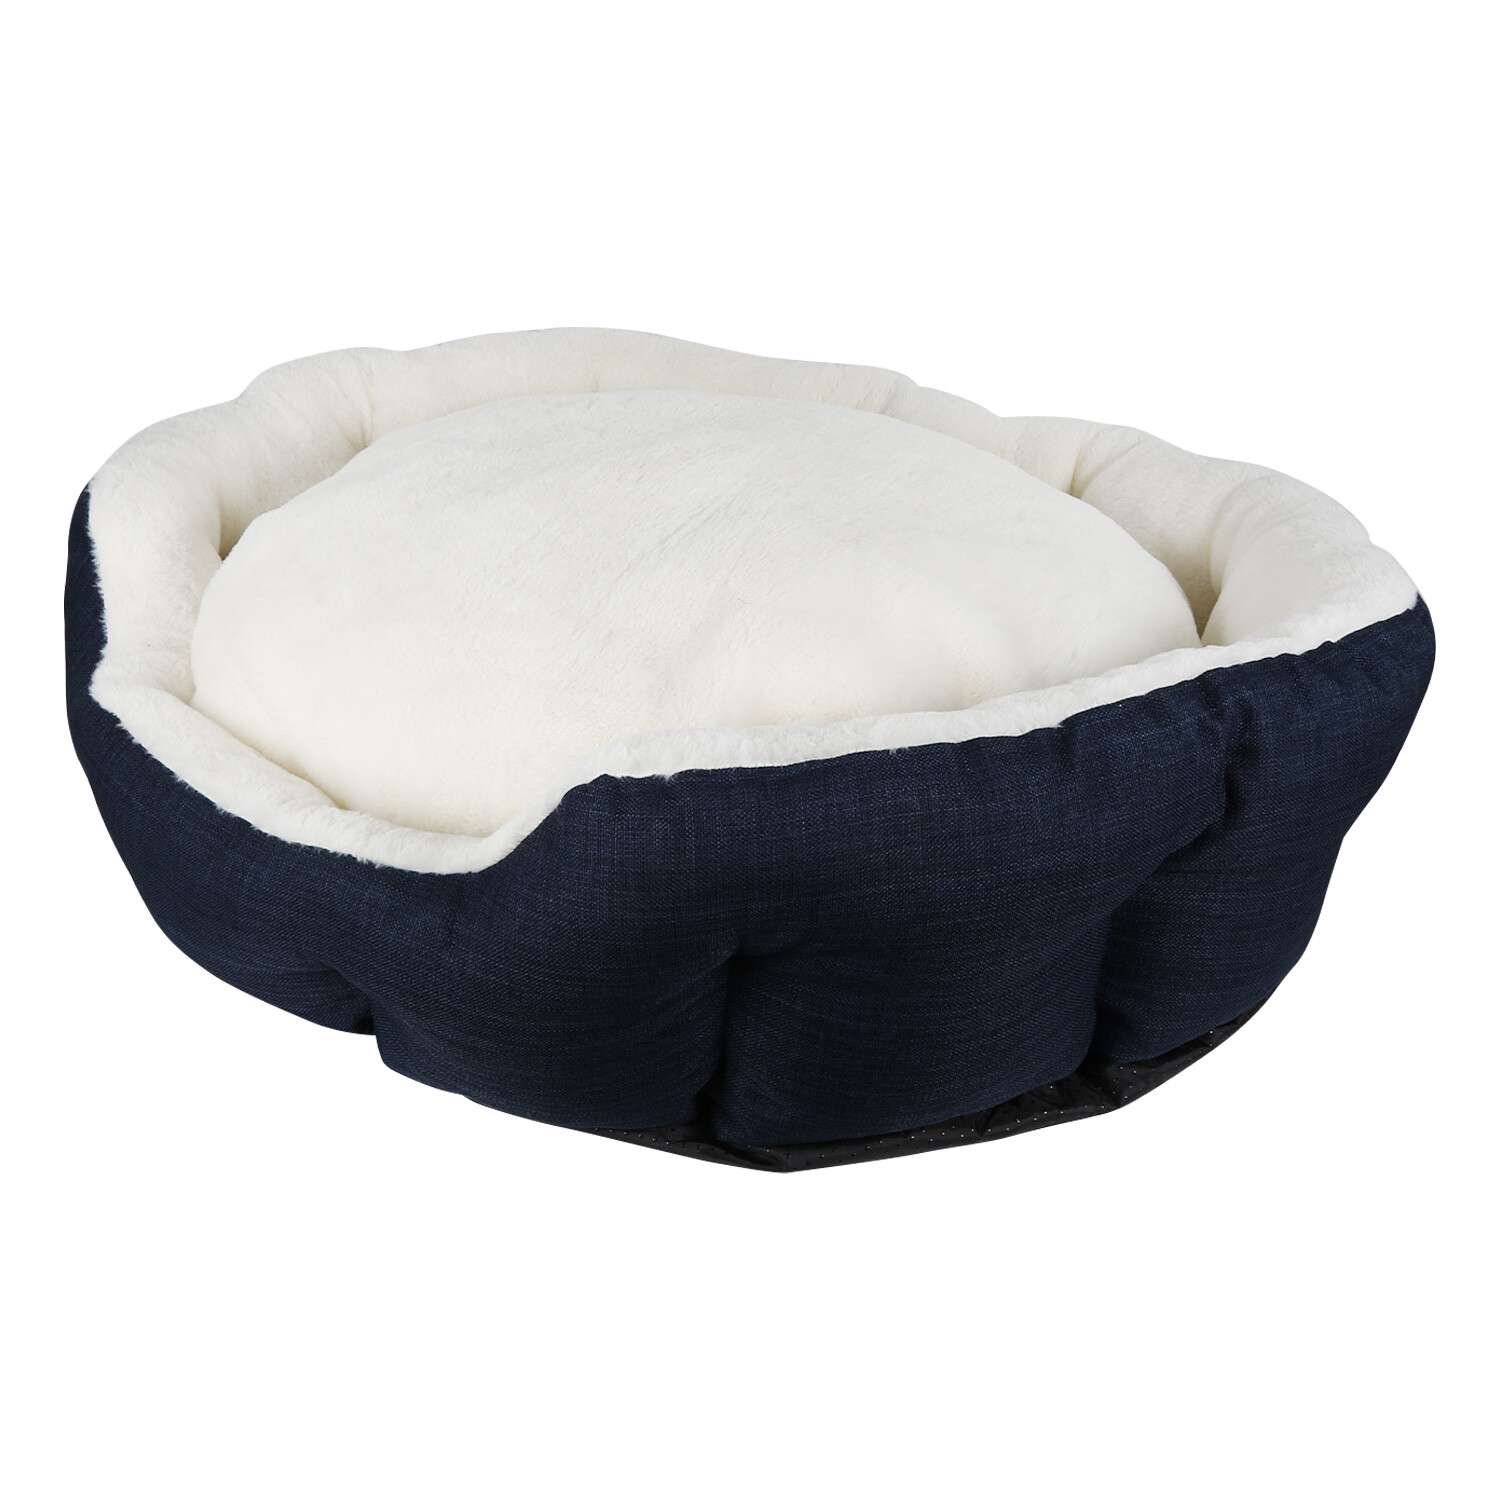 Clever Paws Luxury Large Navy Dog Bed Image 3